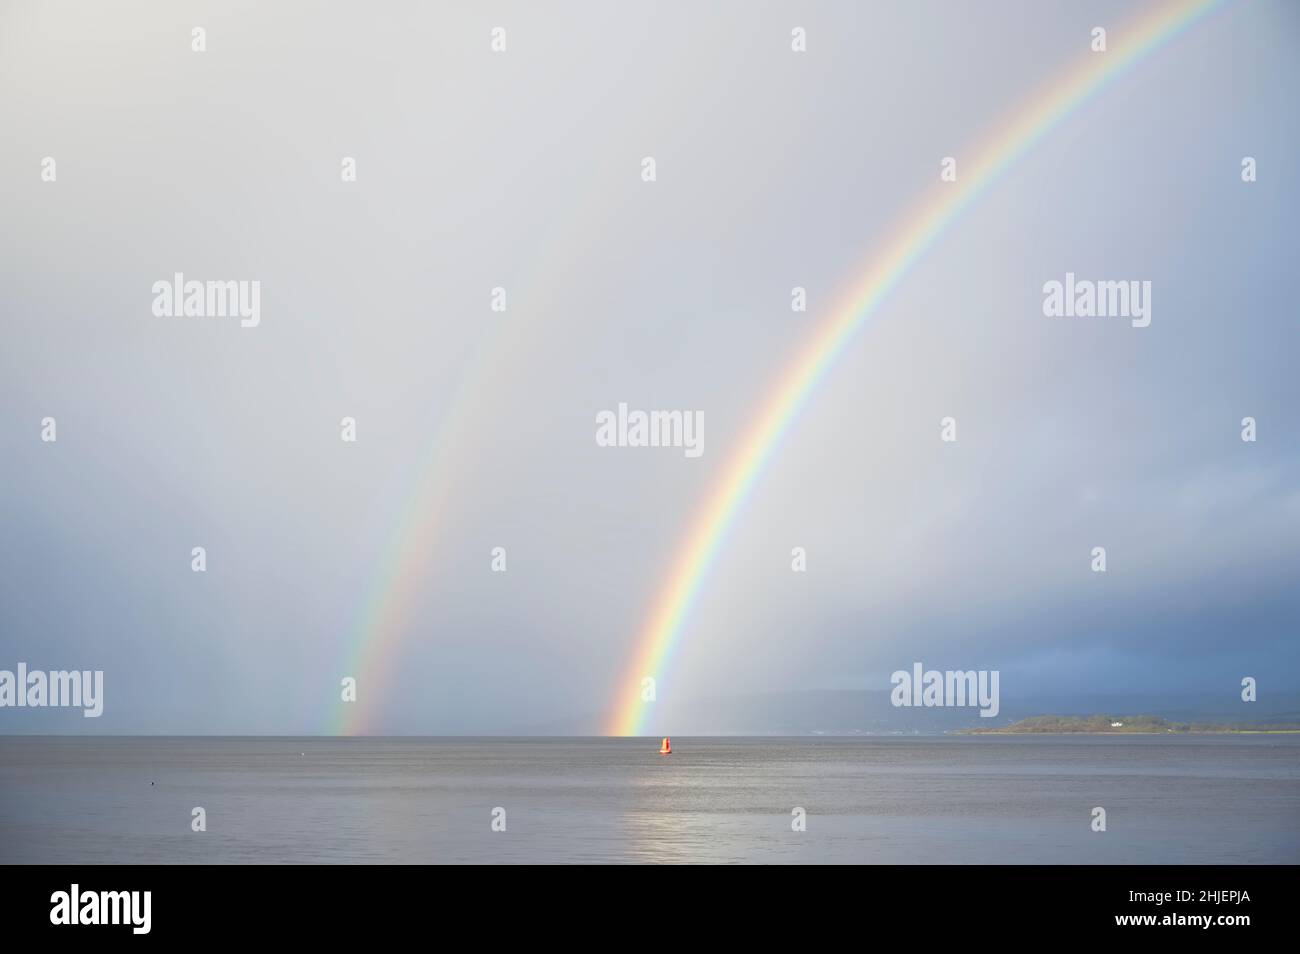 Bright rainbow high in sky over sea during dark storm Stock Photo